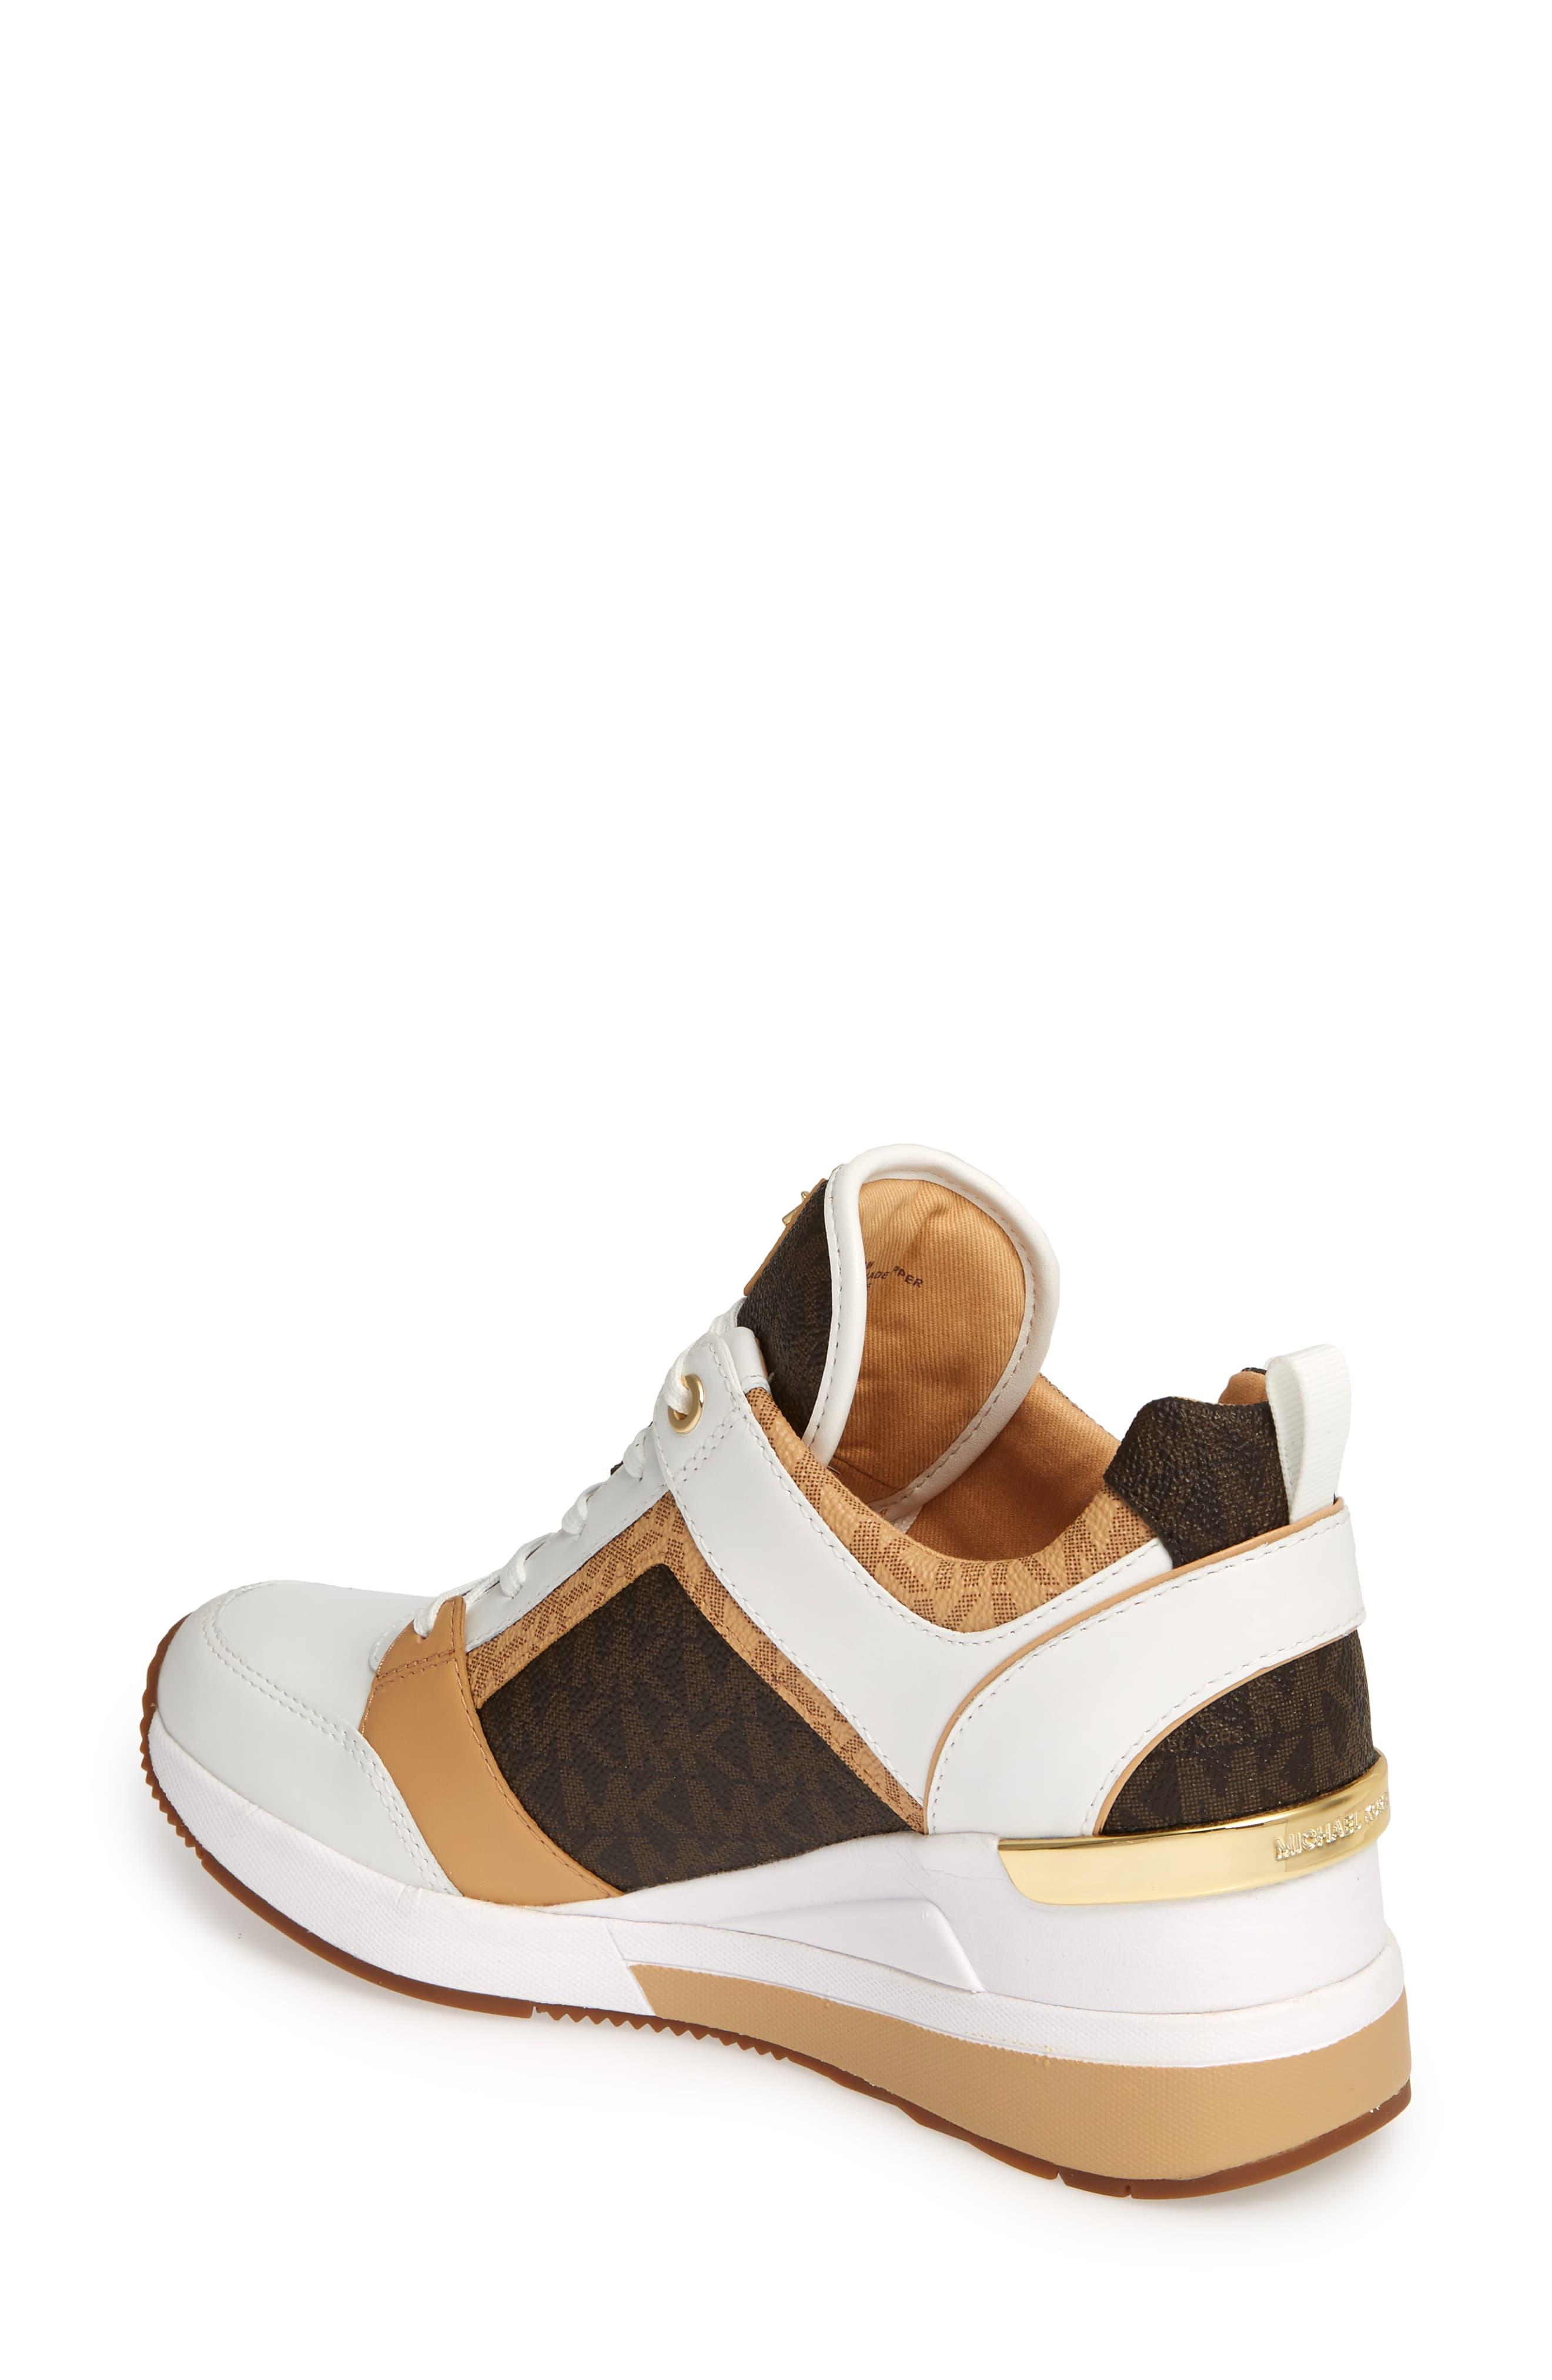 georgie logo and leather trainer